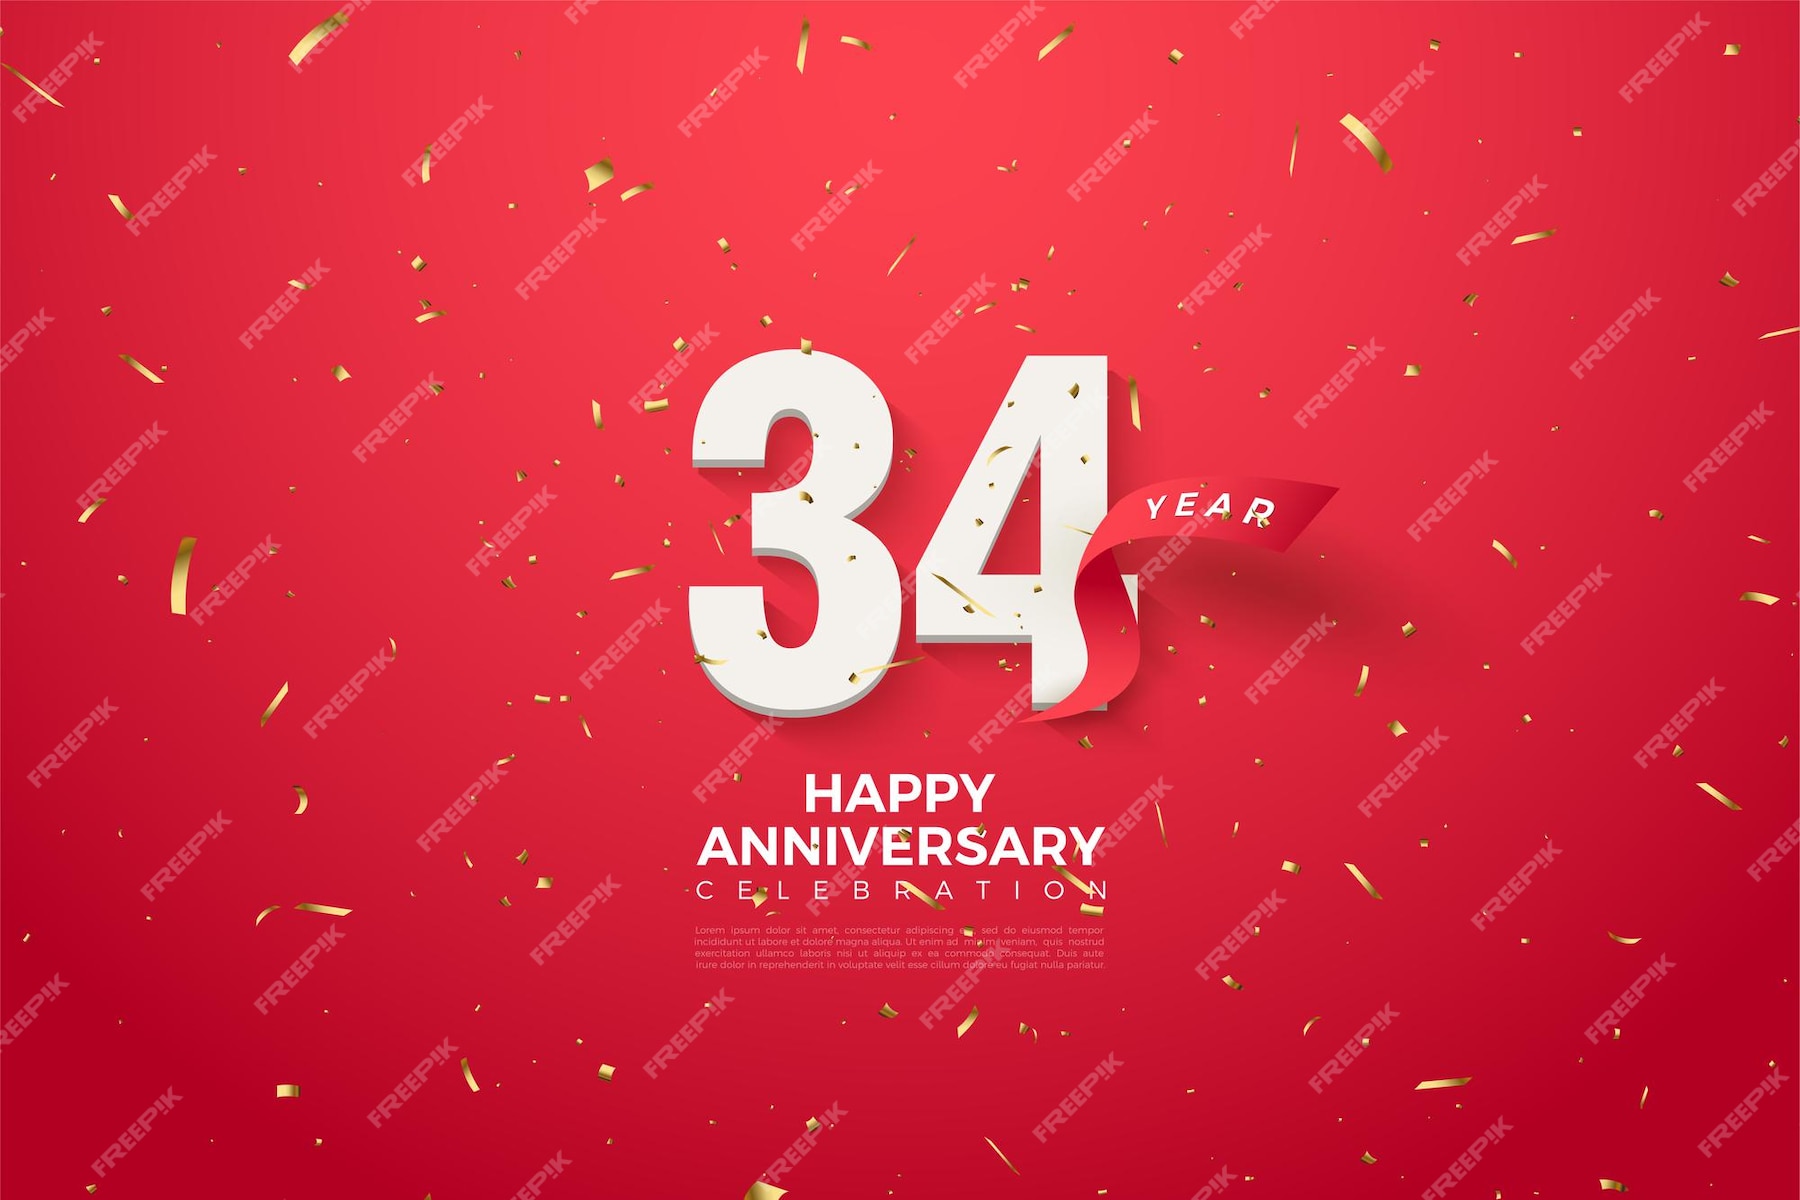 Premium Vector | 34th anniversary with numbers and red ribbon